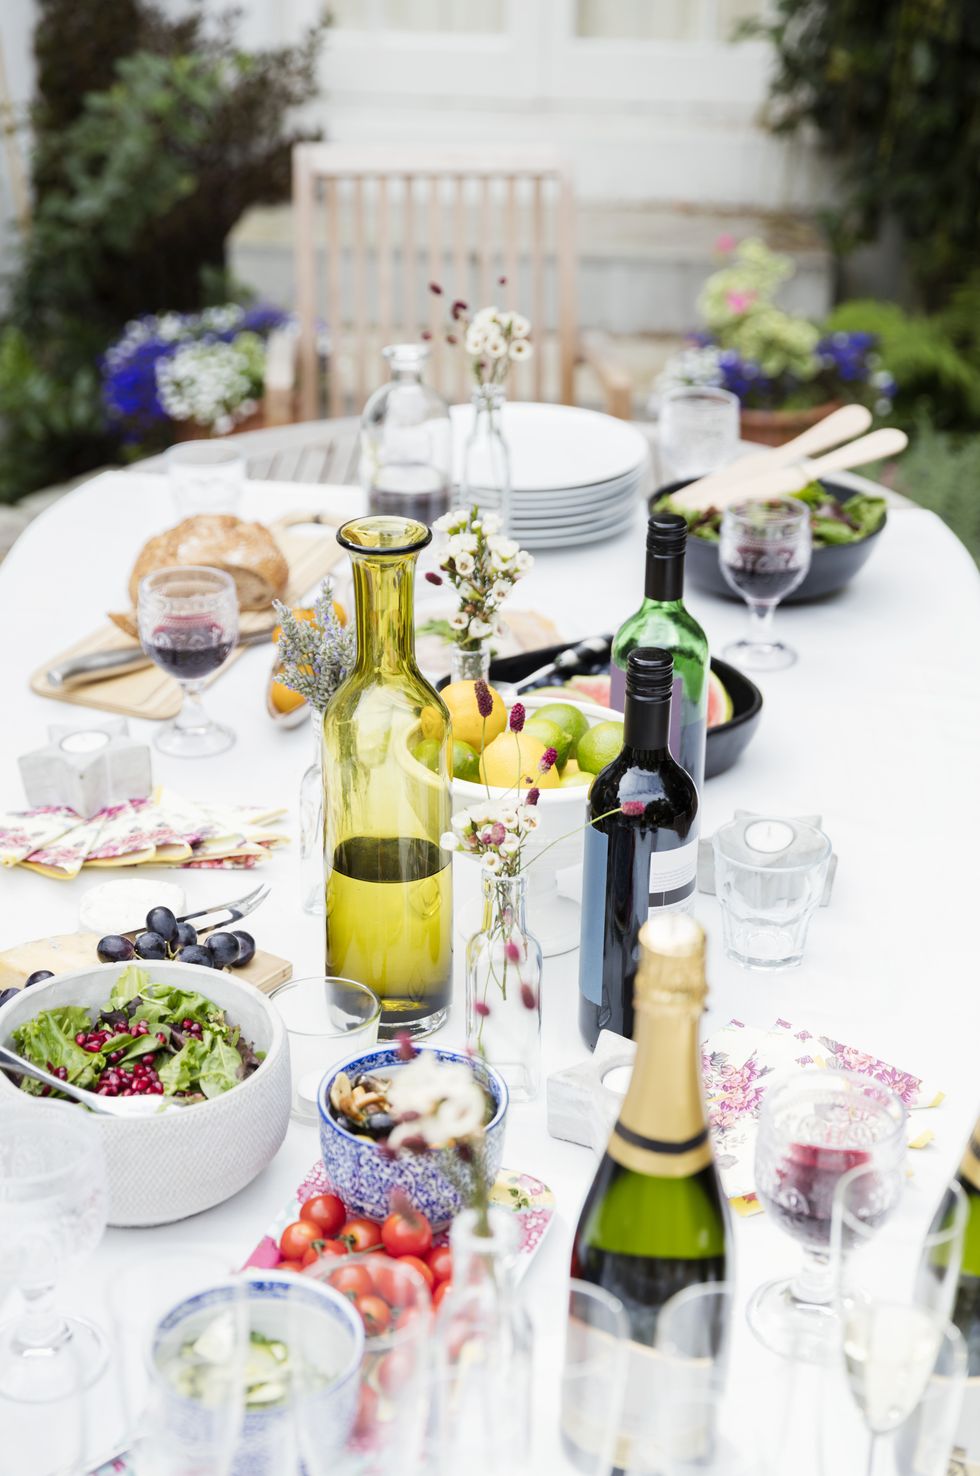 garden party lunch on patio table with wine bottles, a bowl of lemons and limes, grapes, bread and salad